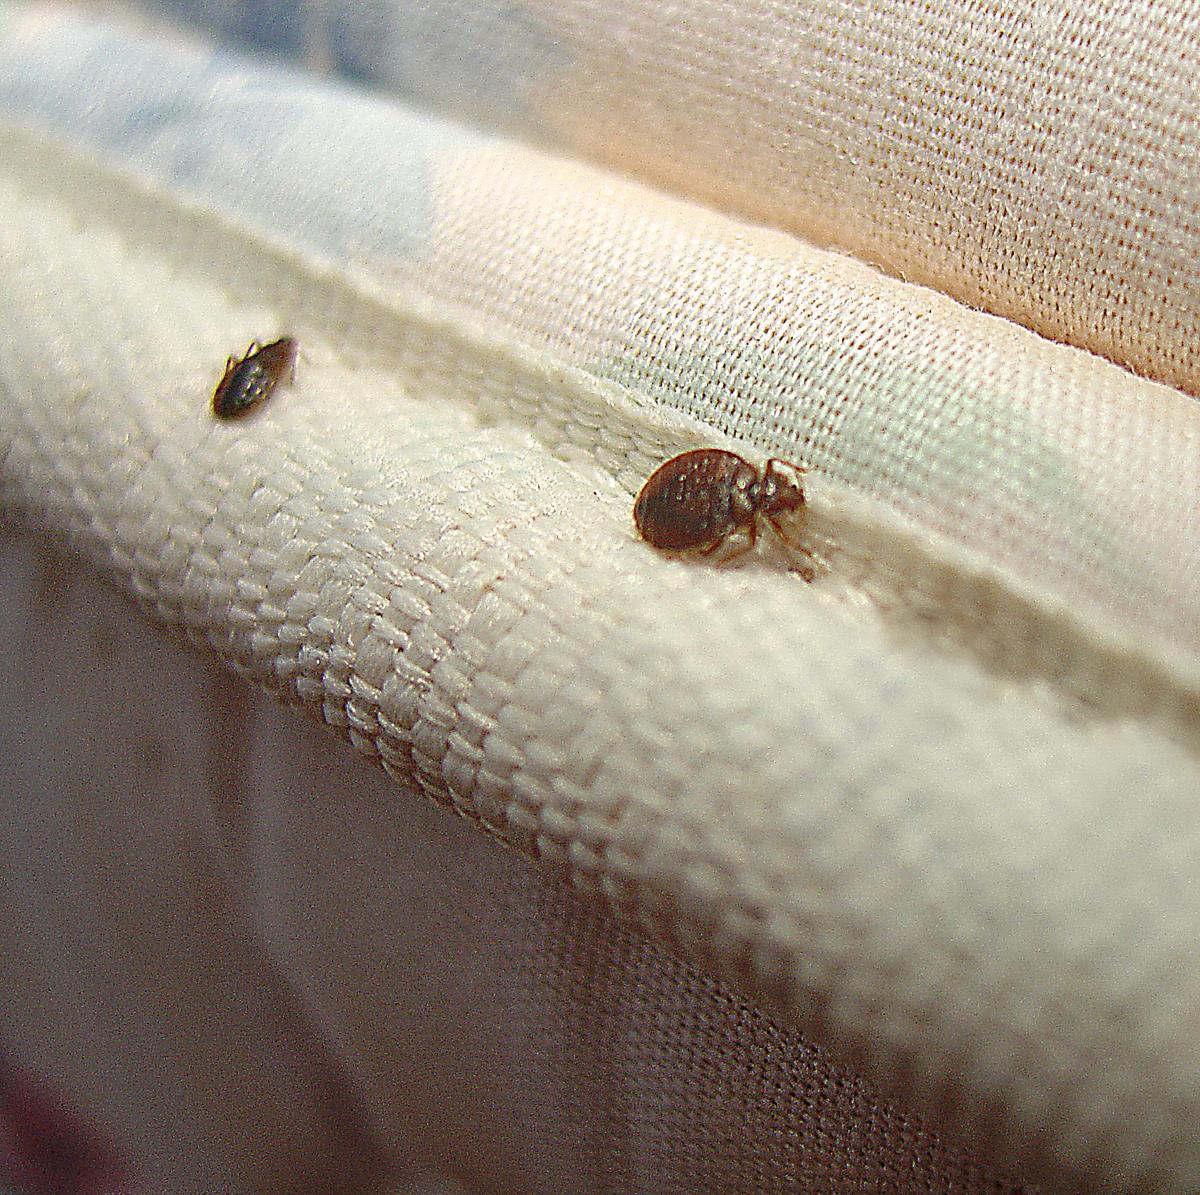 How to Prevent Bed Bug Infestations, Bed Bug Facts